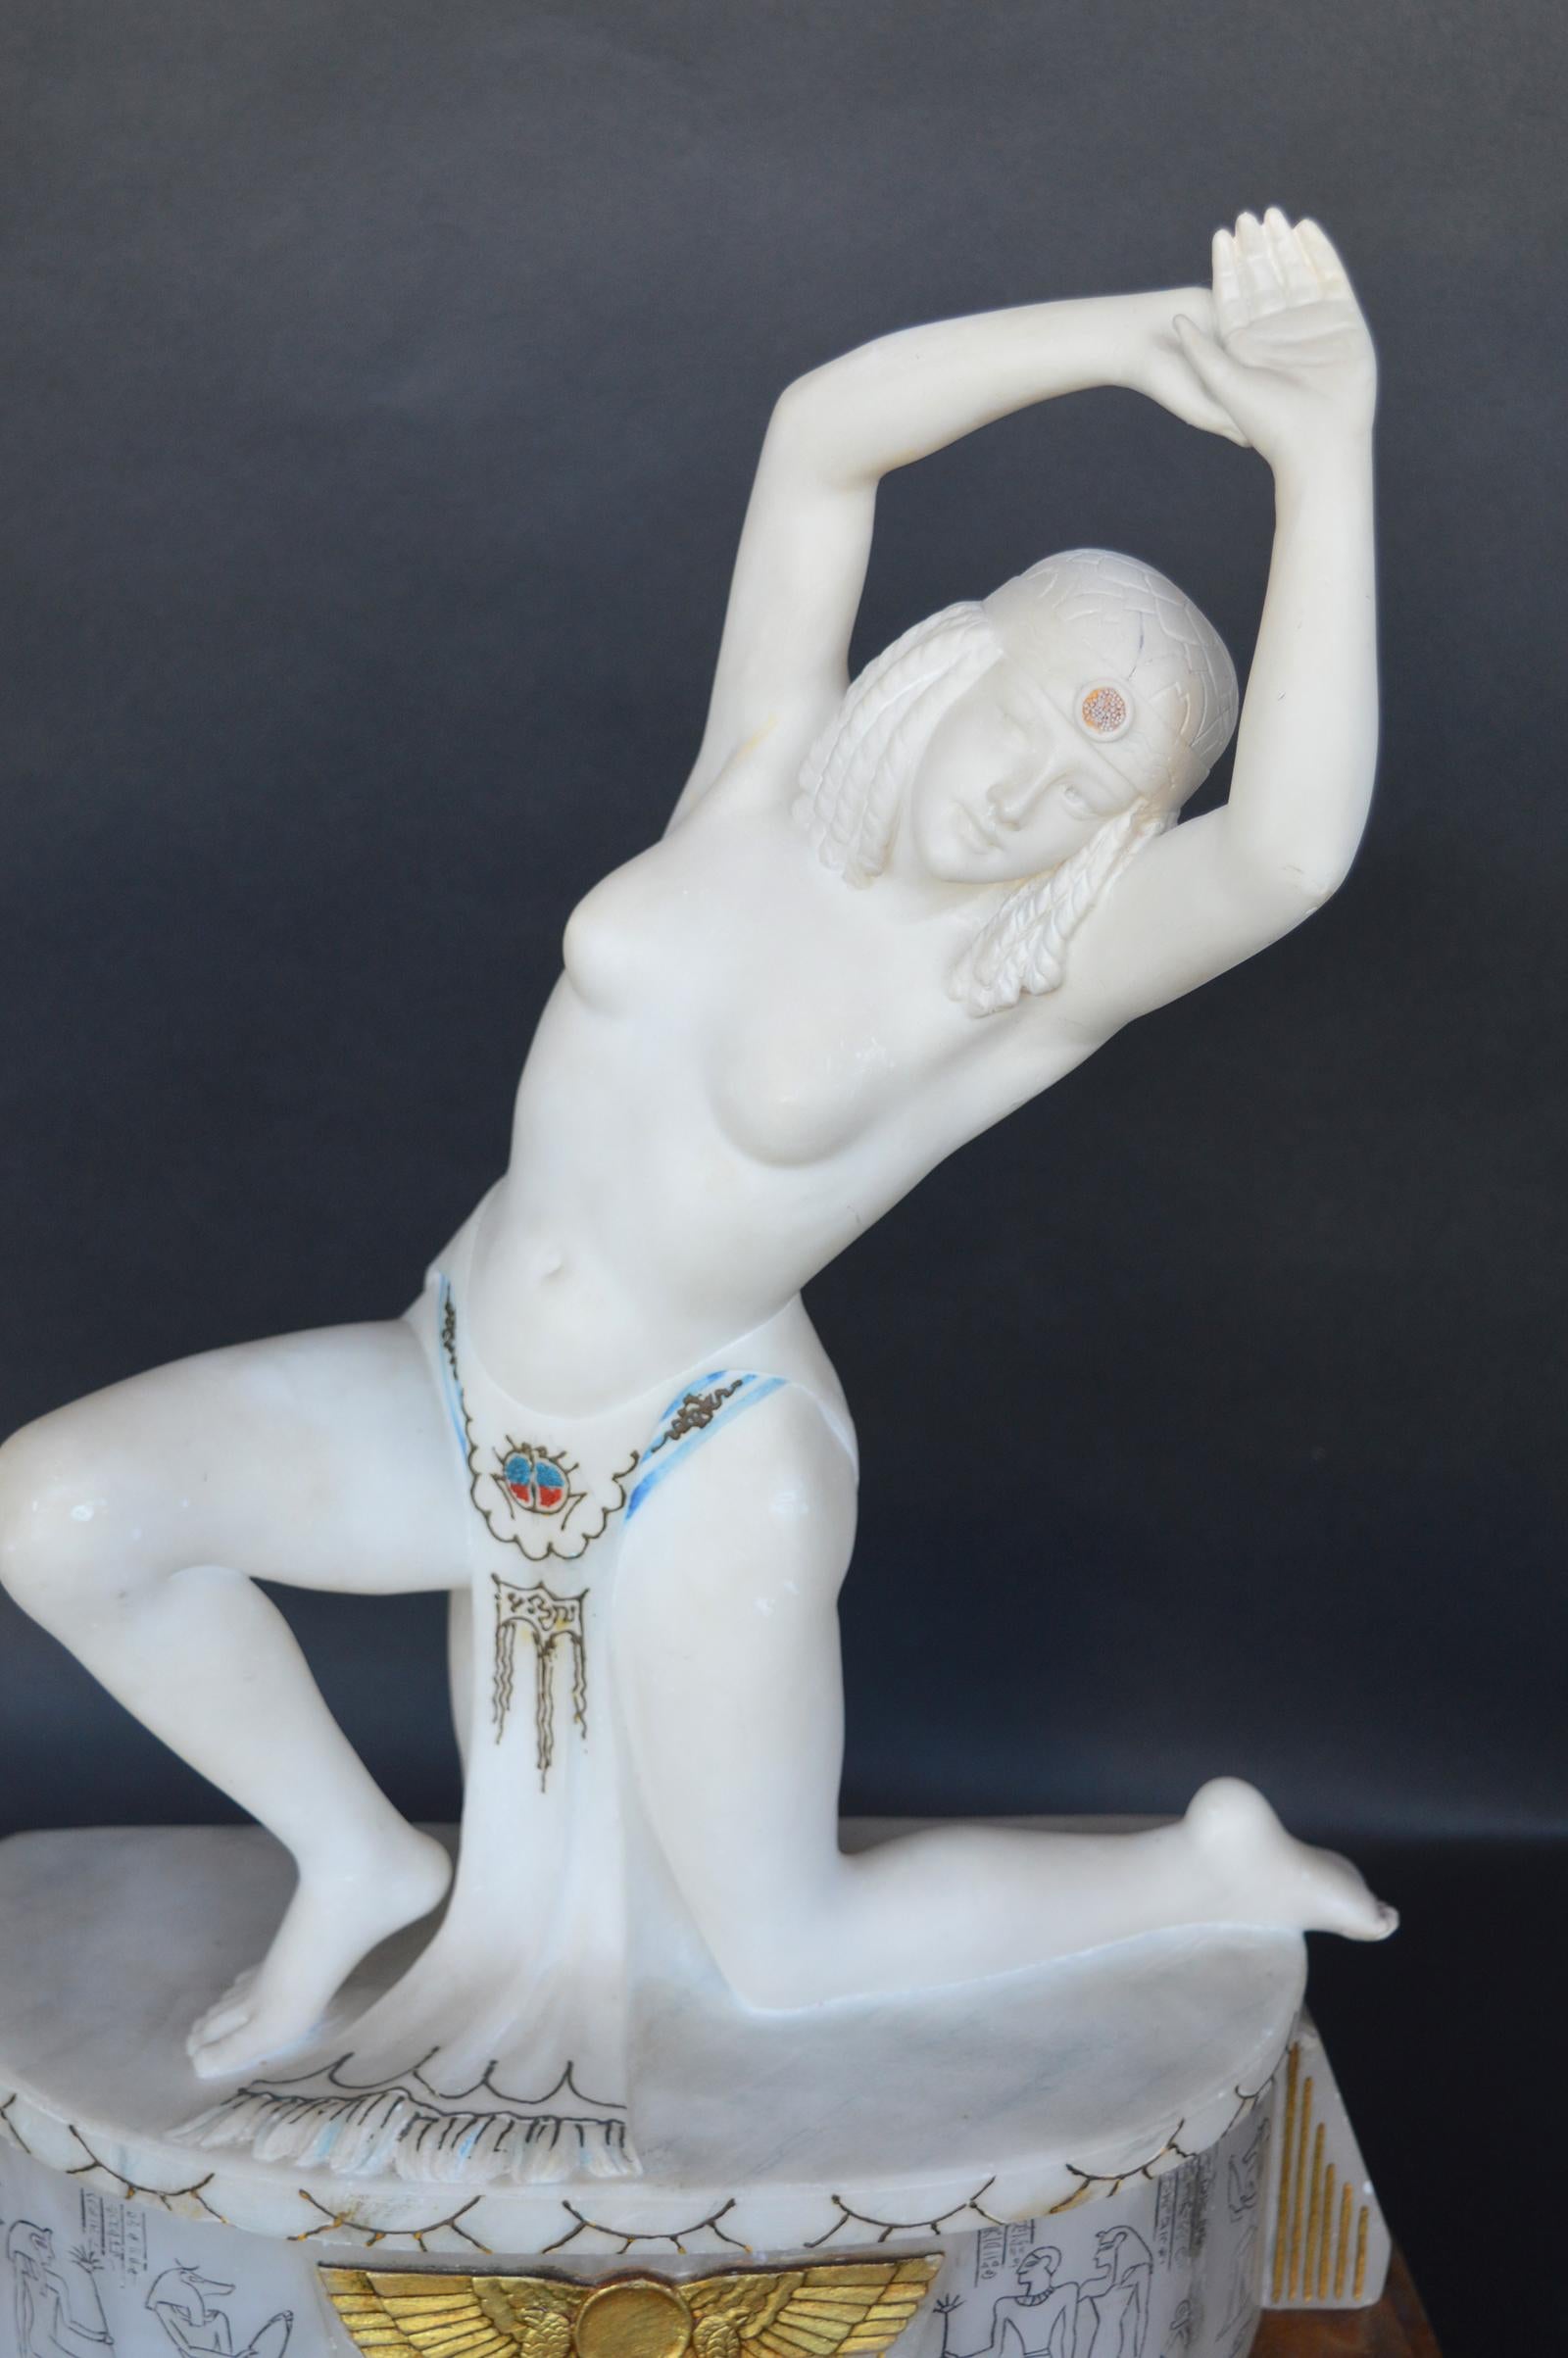 Egyptian inspired Art Deco dancer. Made of Alabaster on an onyx base. The base of the dancer lights up.